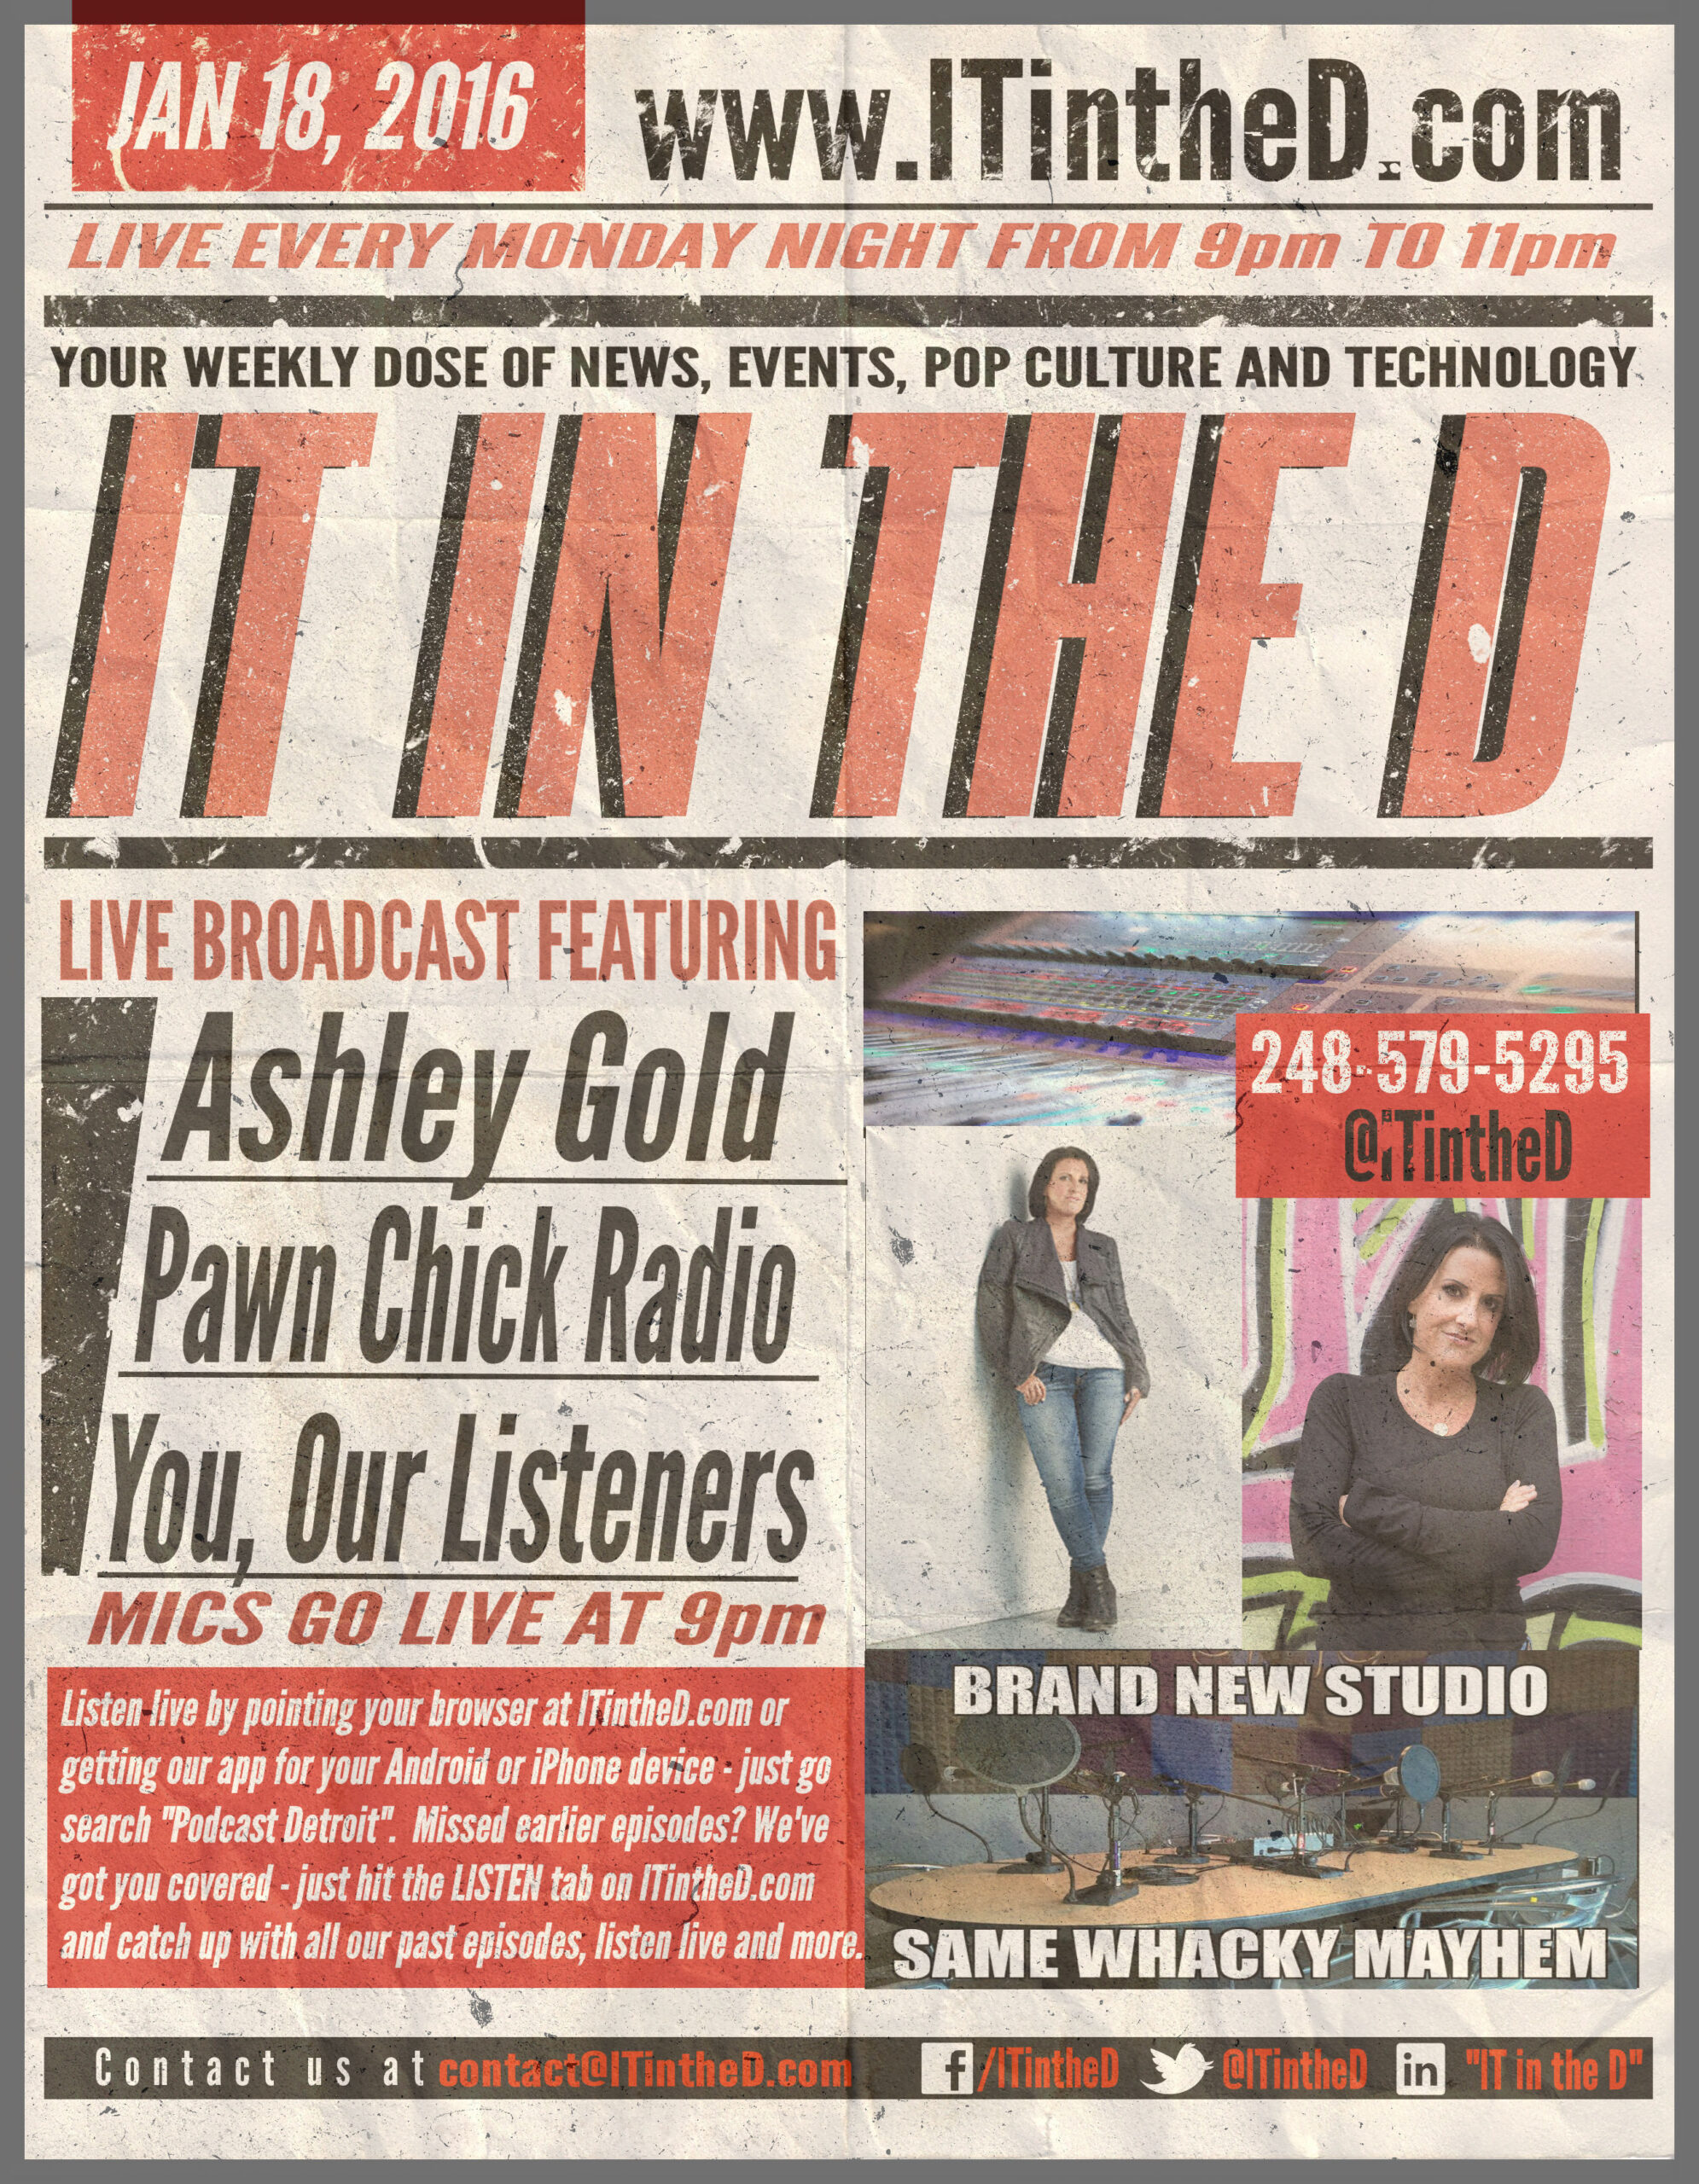 Ashley Gold Live In-Studio Tonight, Blogs, Event Updates and More for 1/18/2016